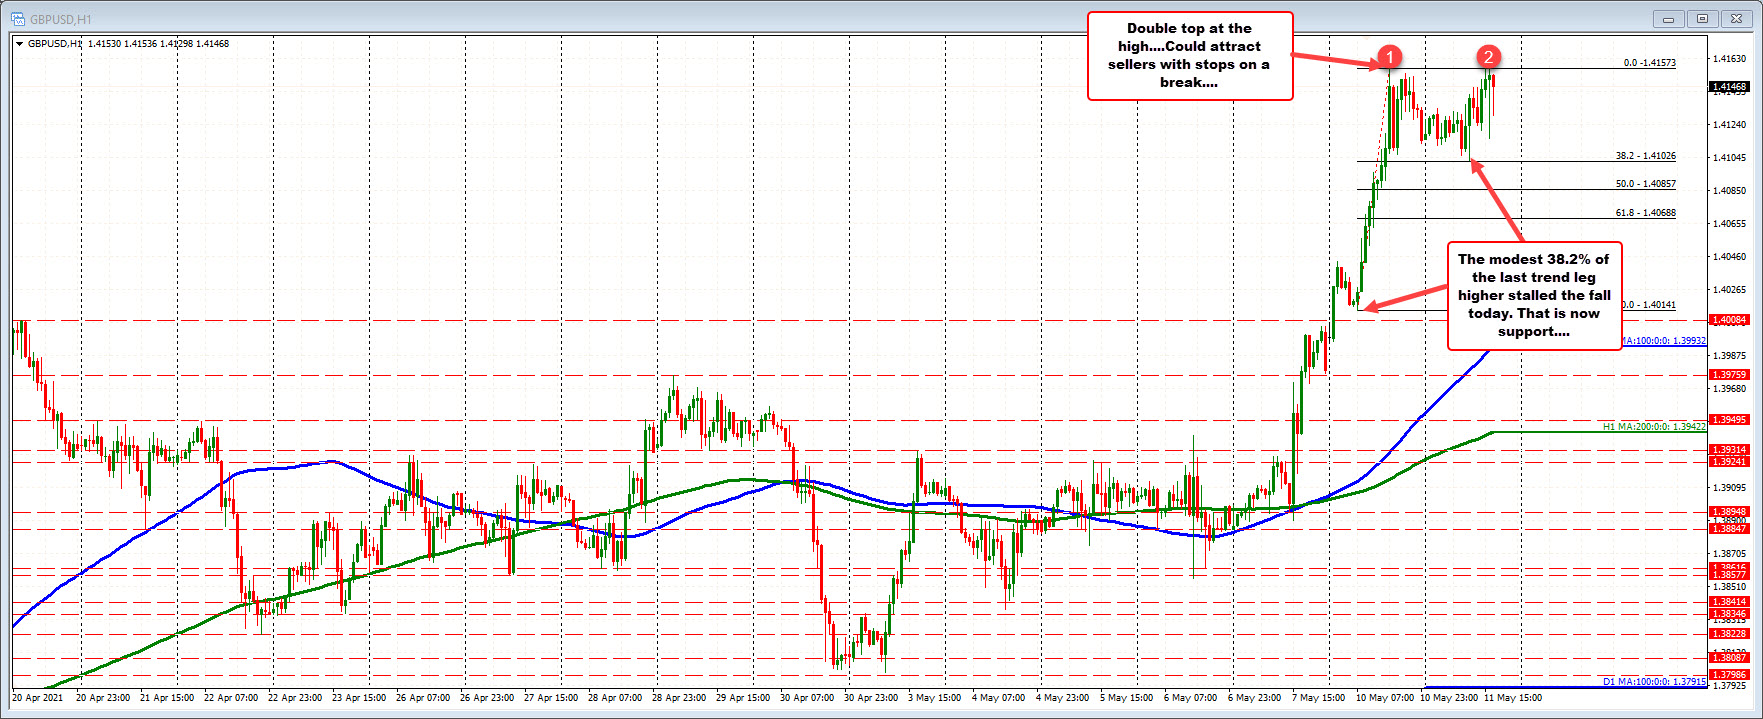 The GBPUSD on the hourly